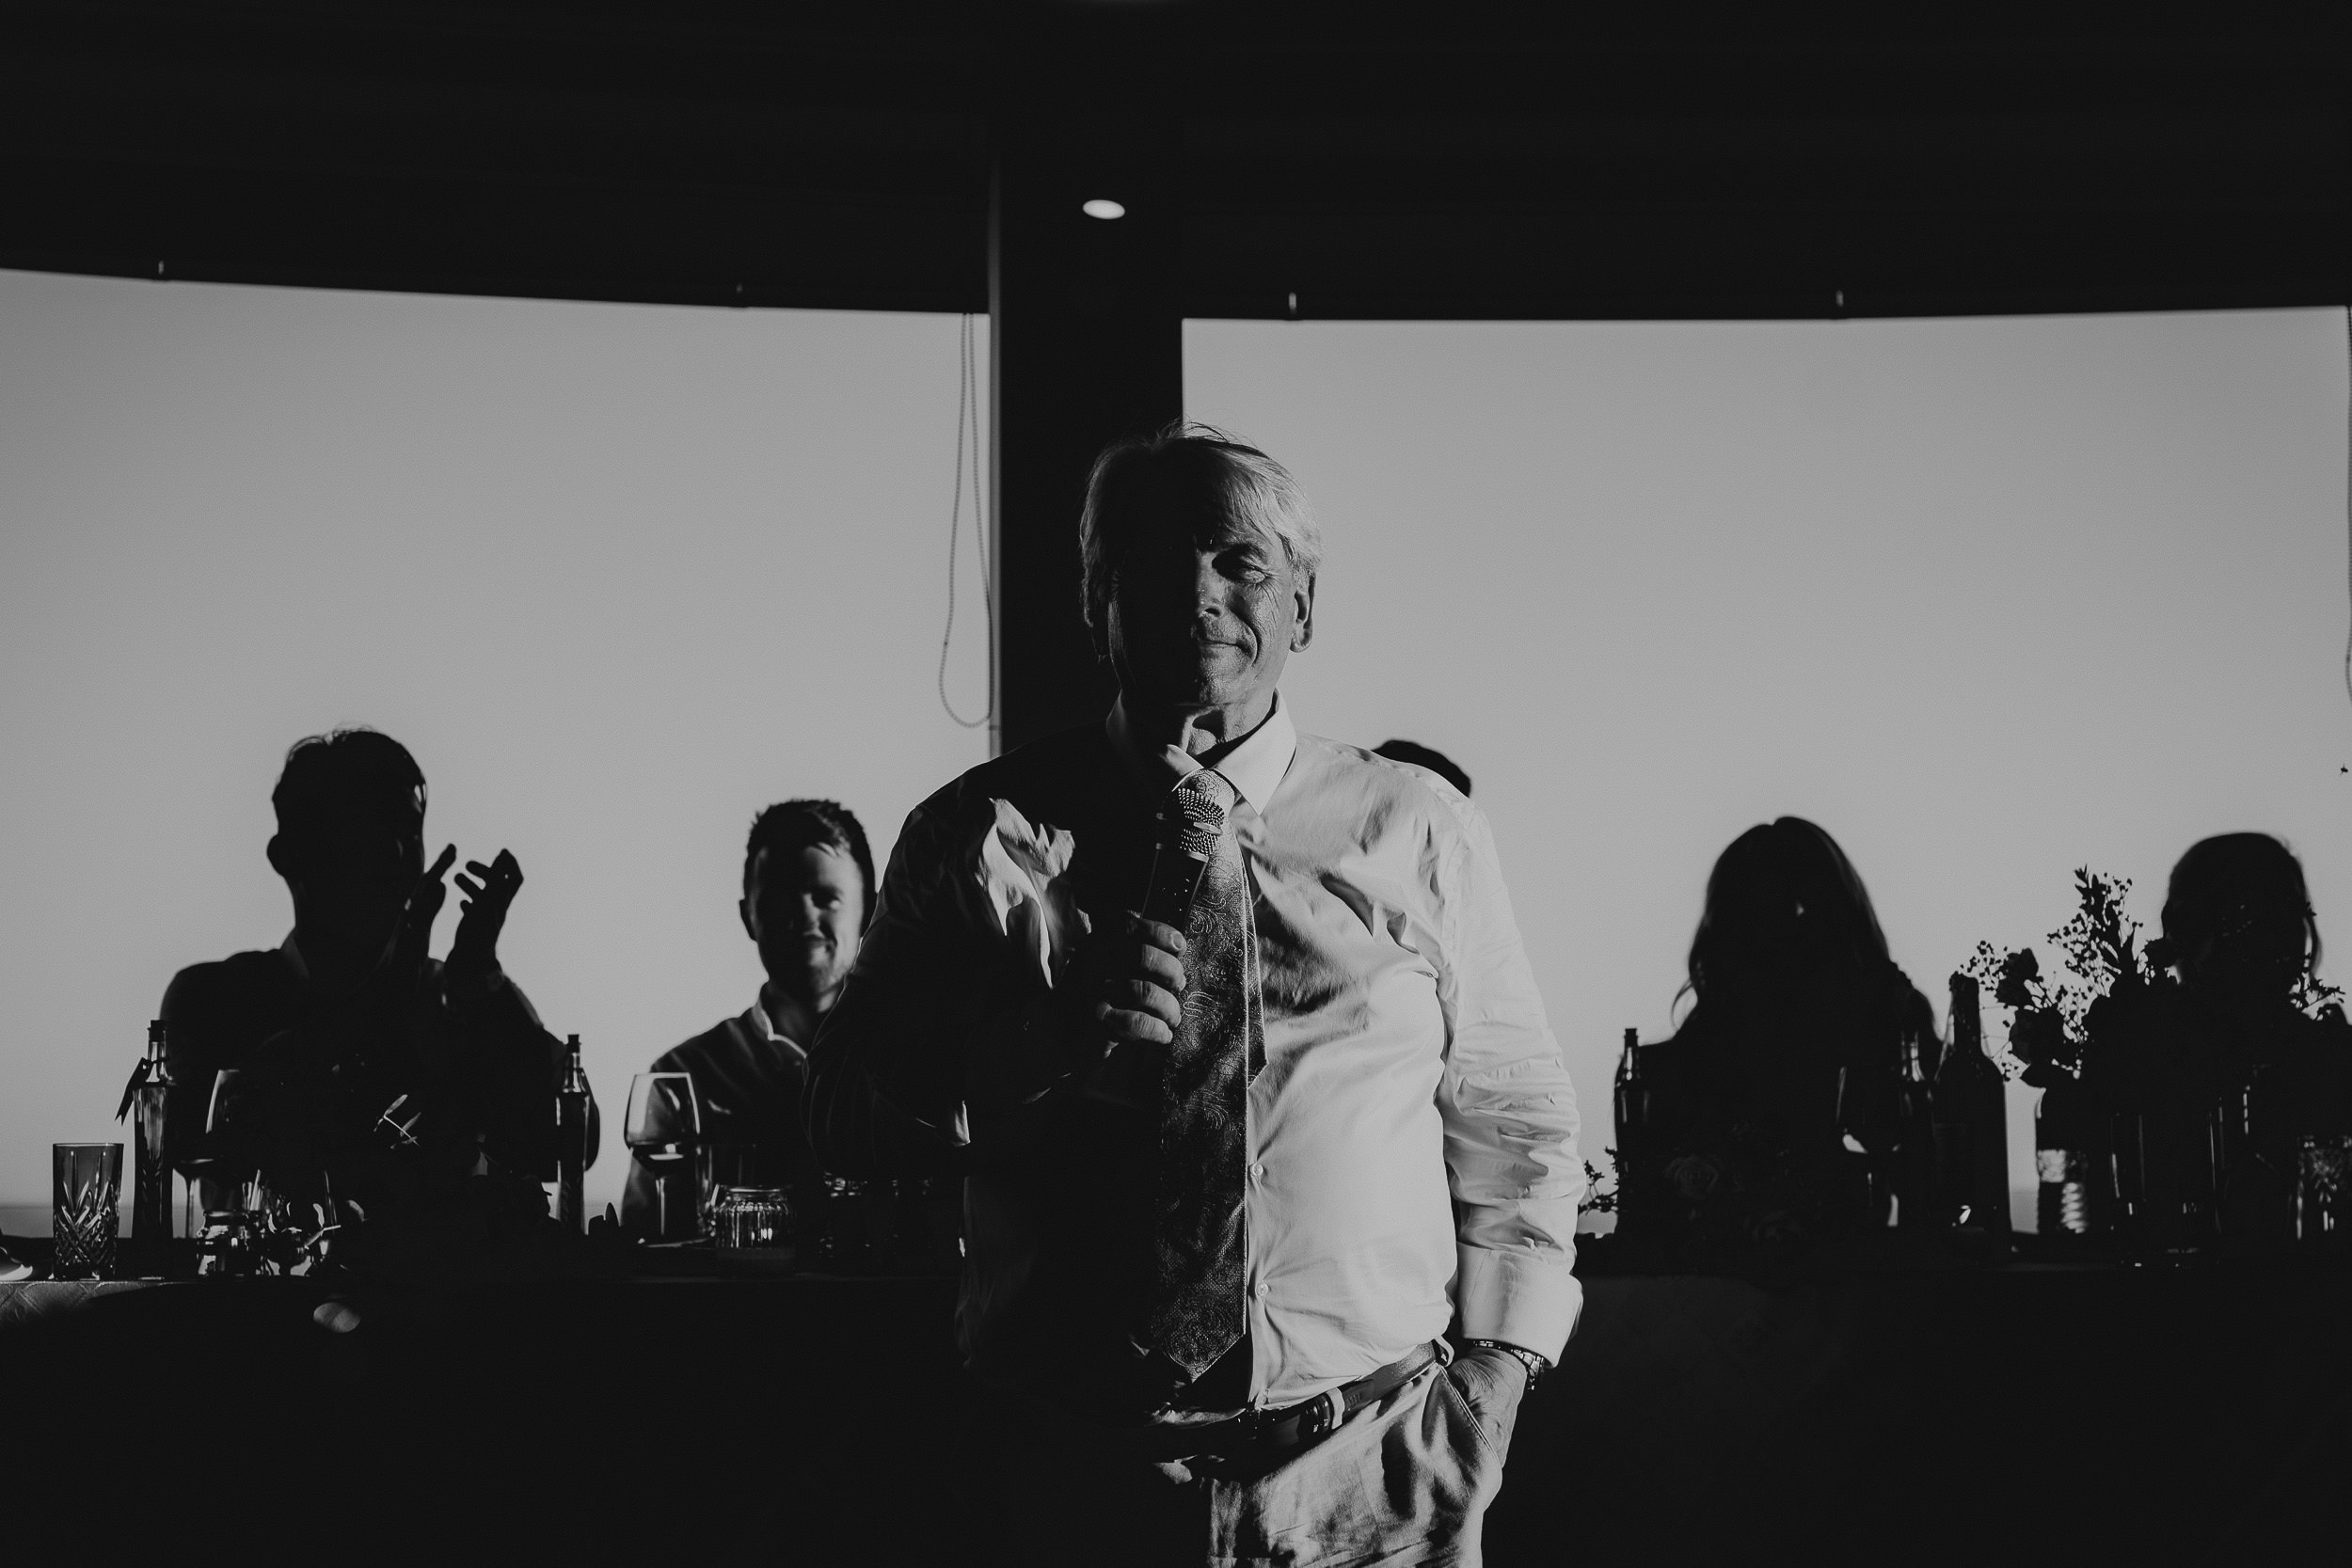 A black and white wedding photo capturing a man standing in front of a group of people.